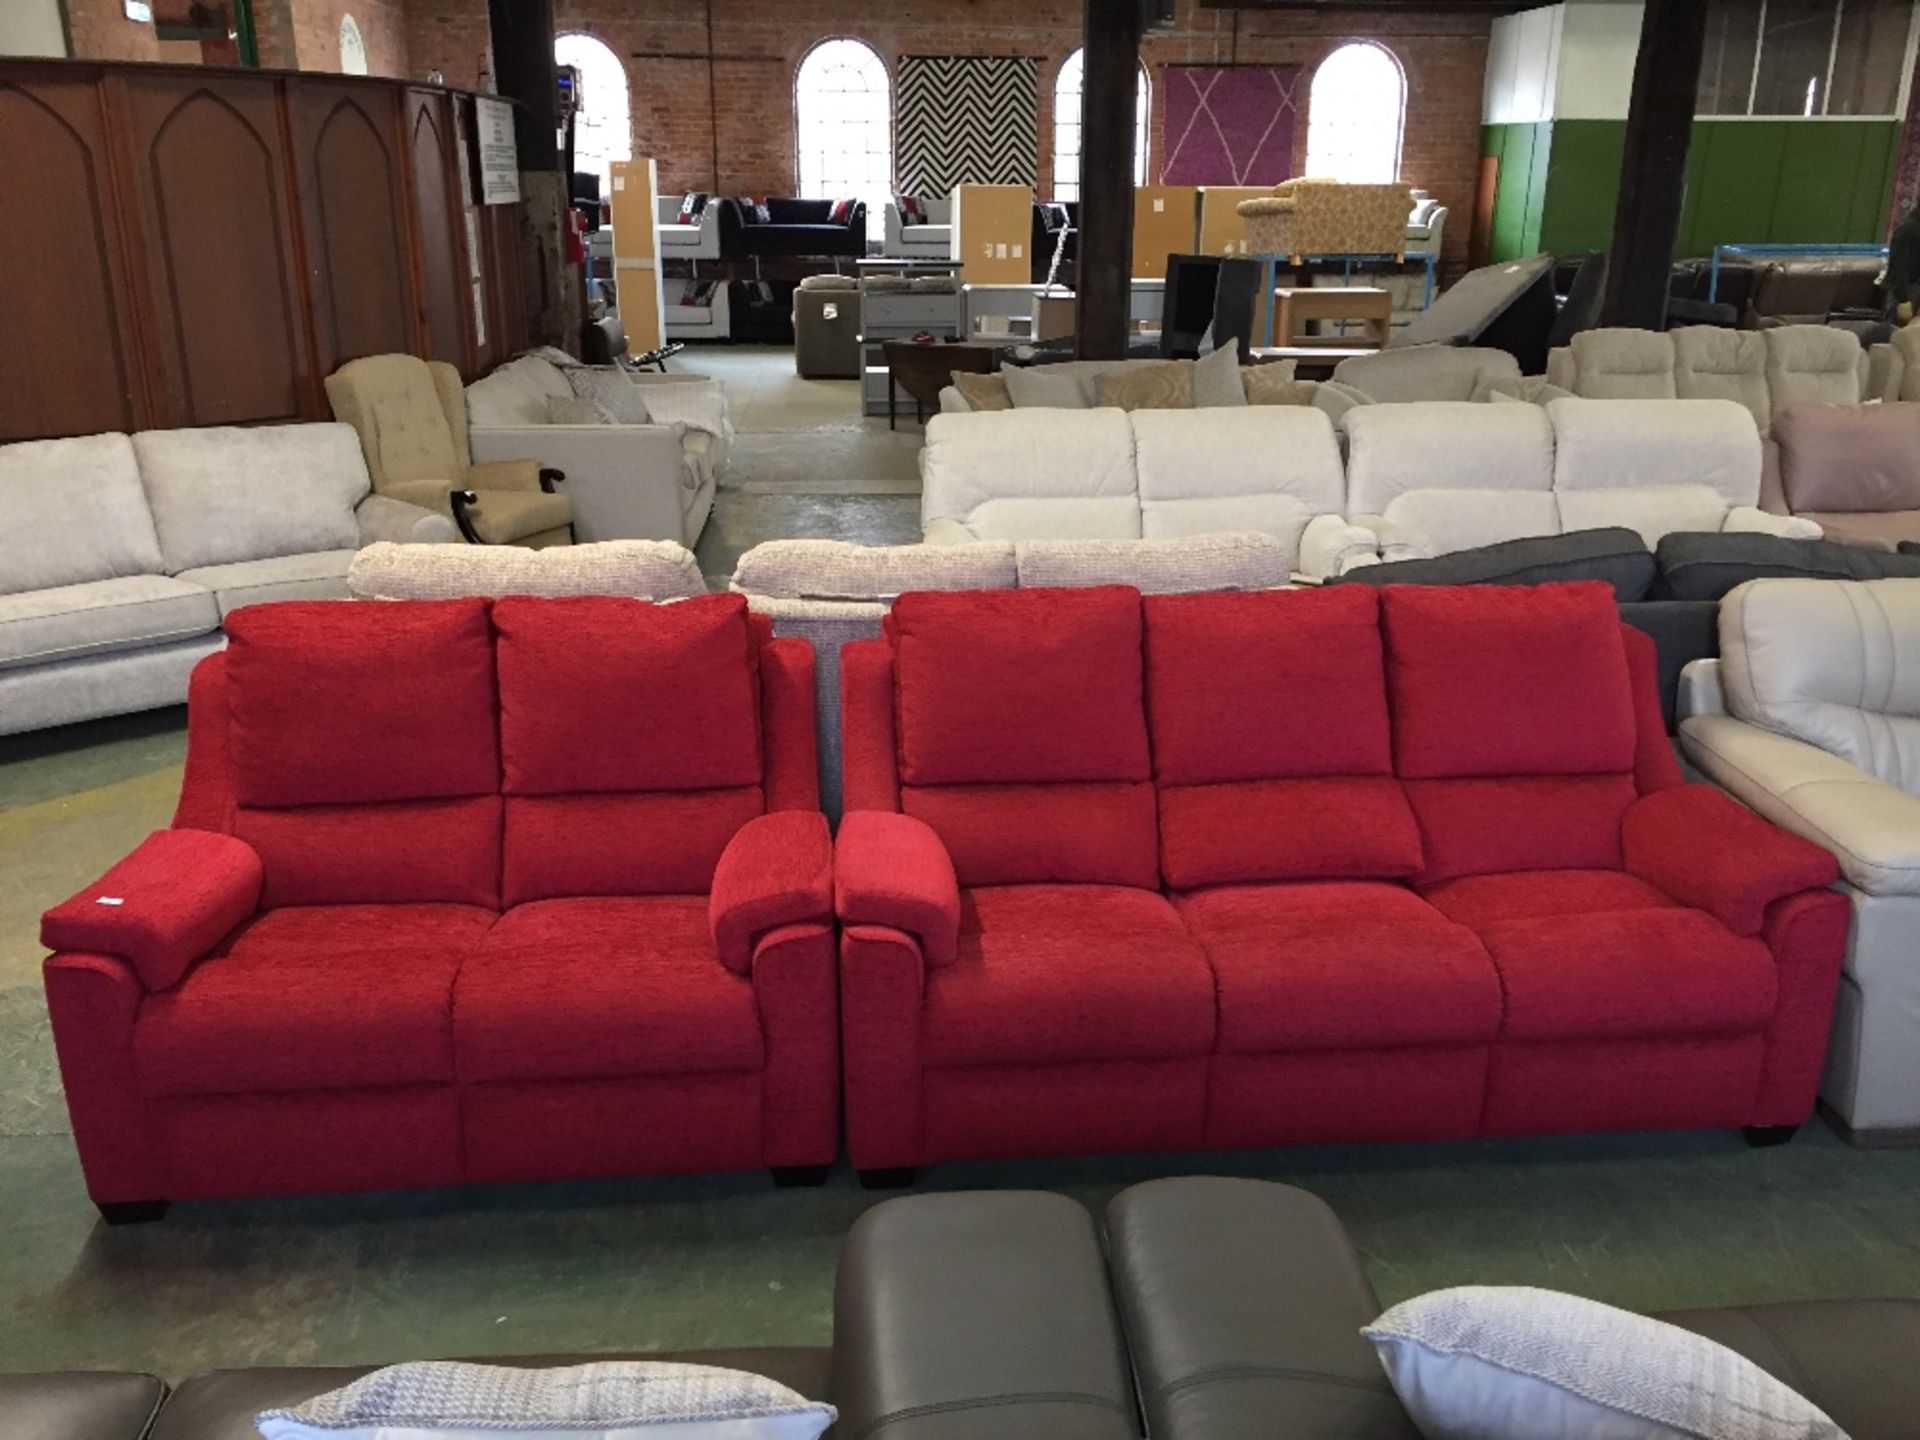 RED HIGH BACK 3 SEATER SOFA AND 2 SEATER SOFA(TROO